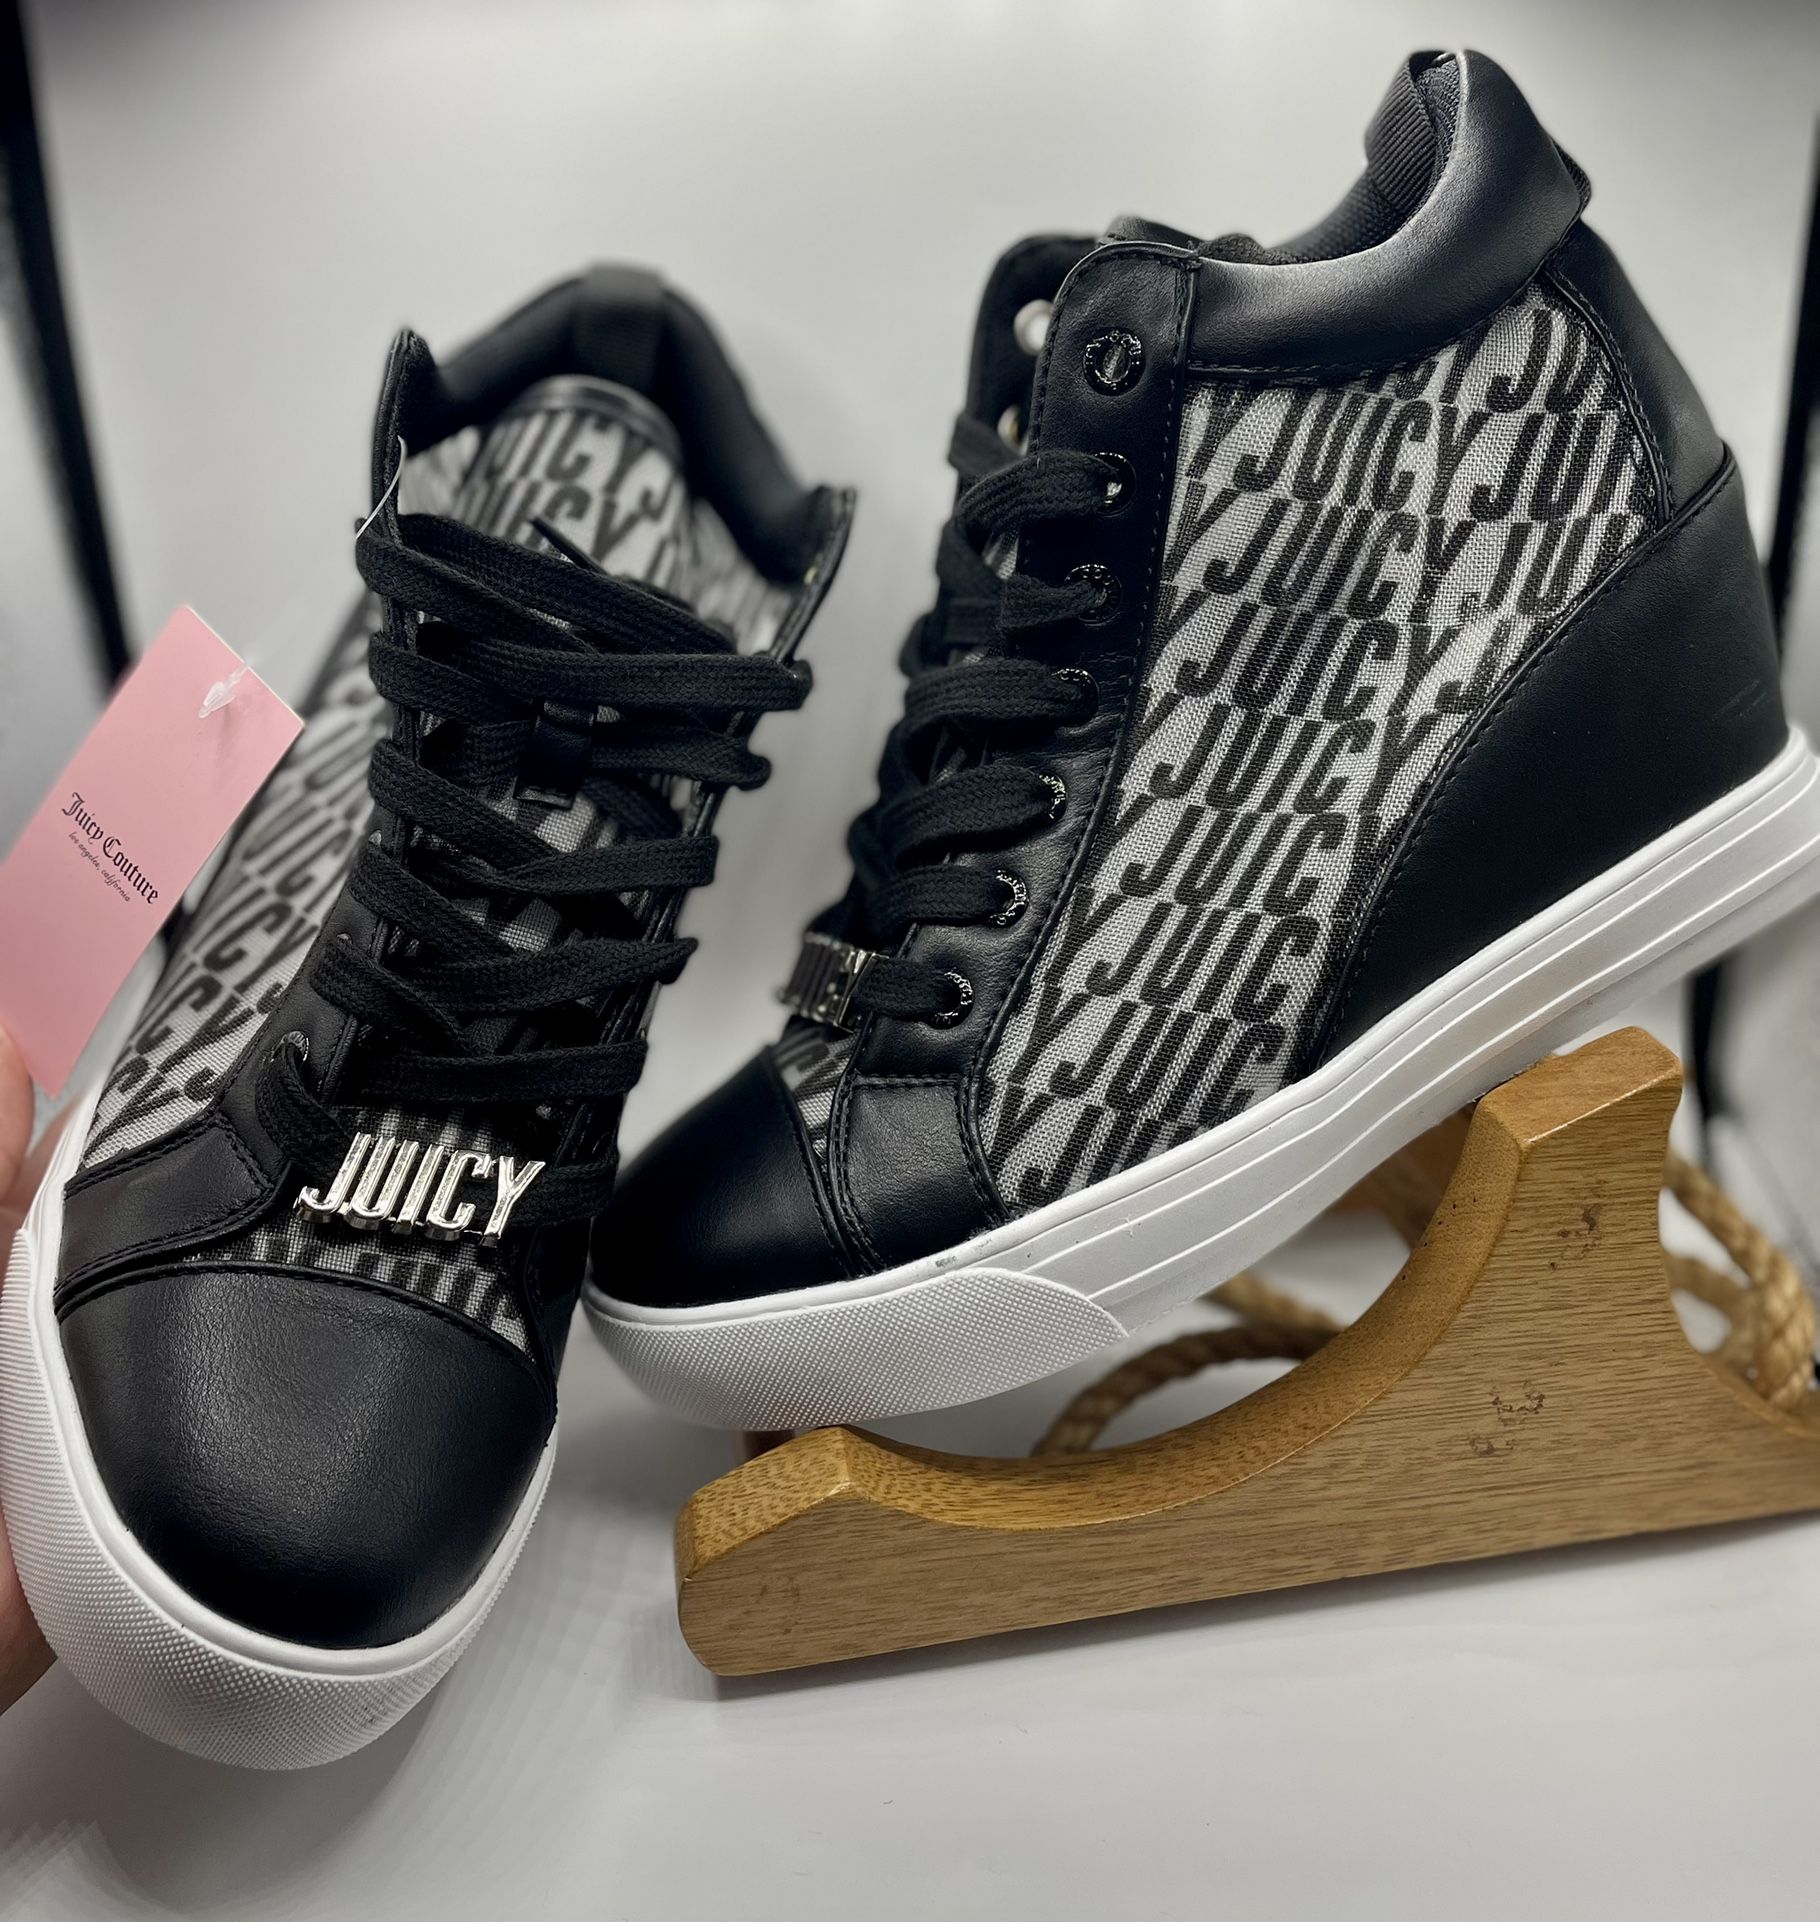 JUICY COUTURE Jorgia Wedge Lace-Up Sneakers